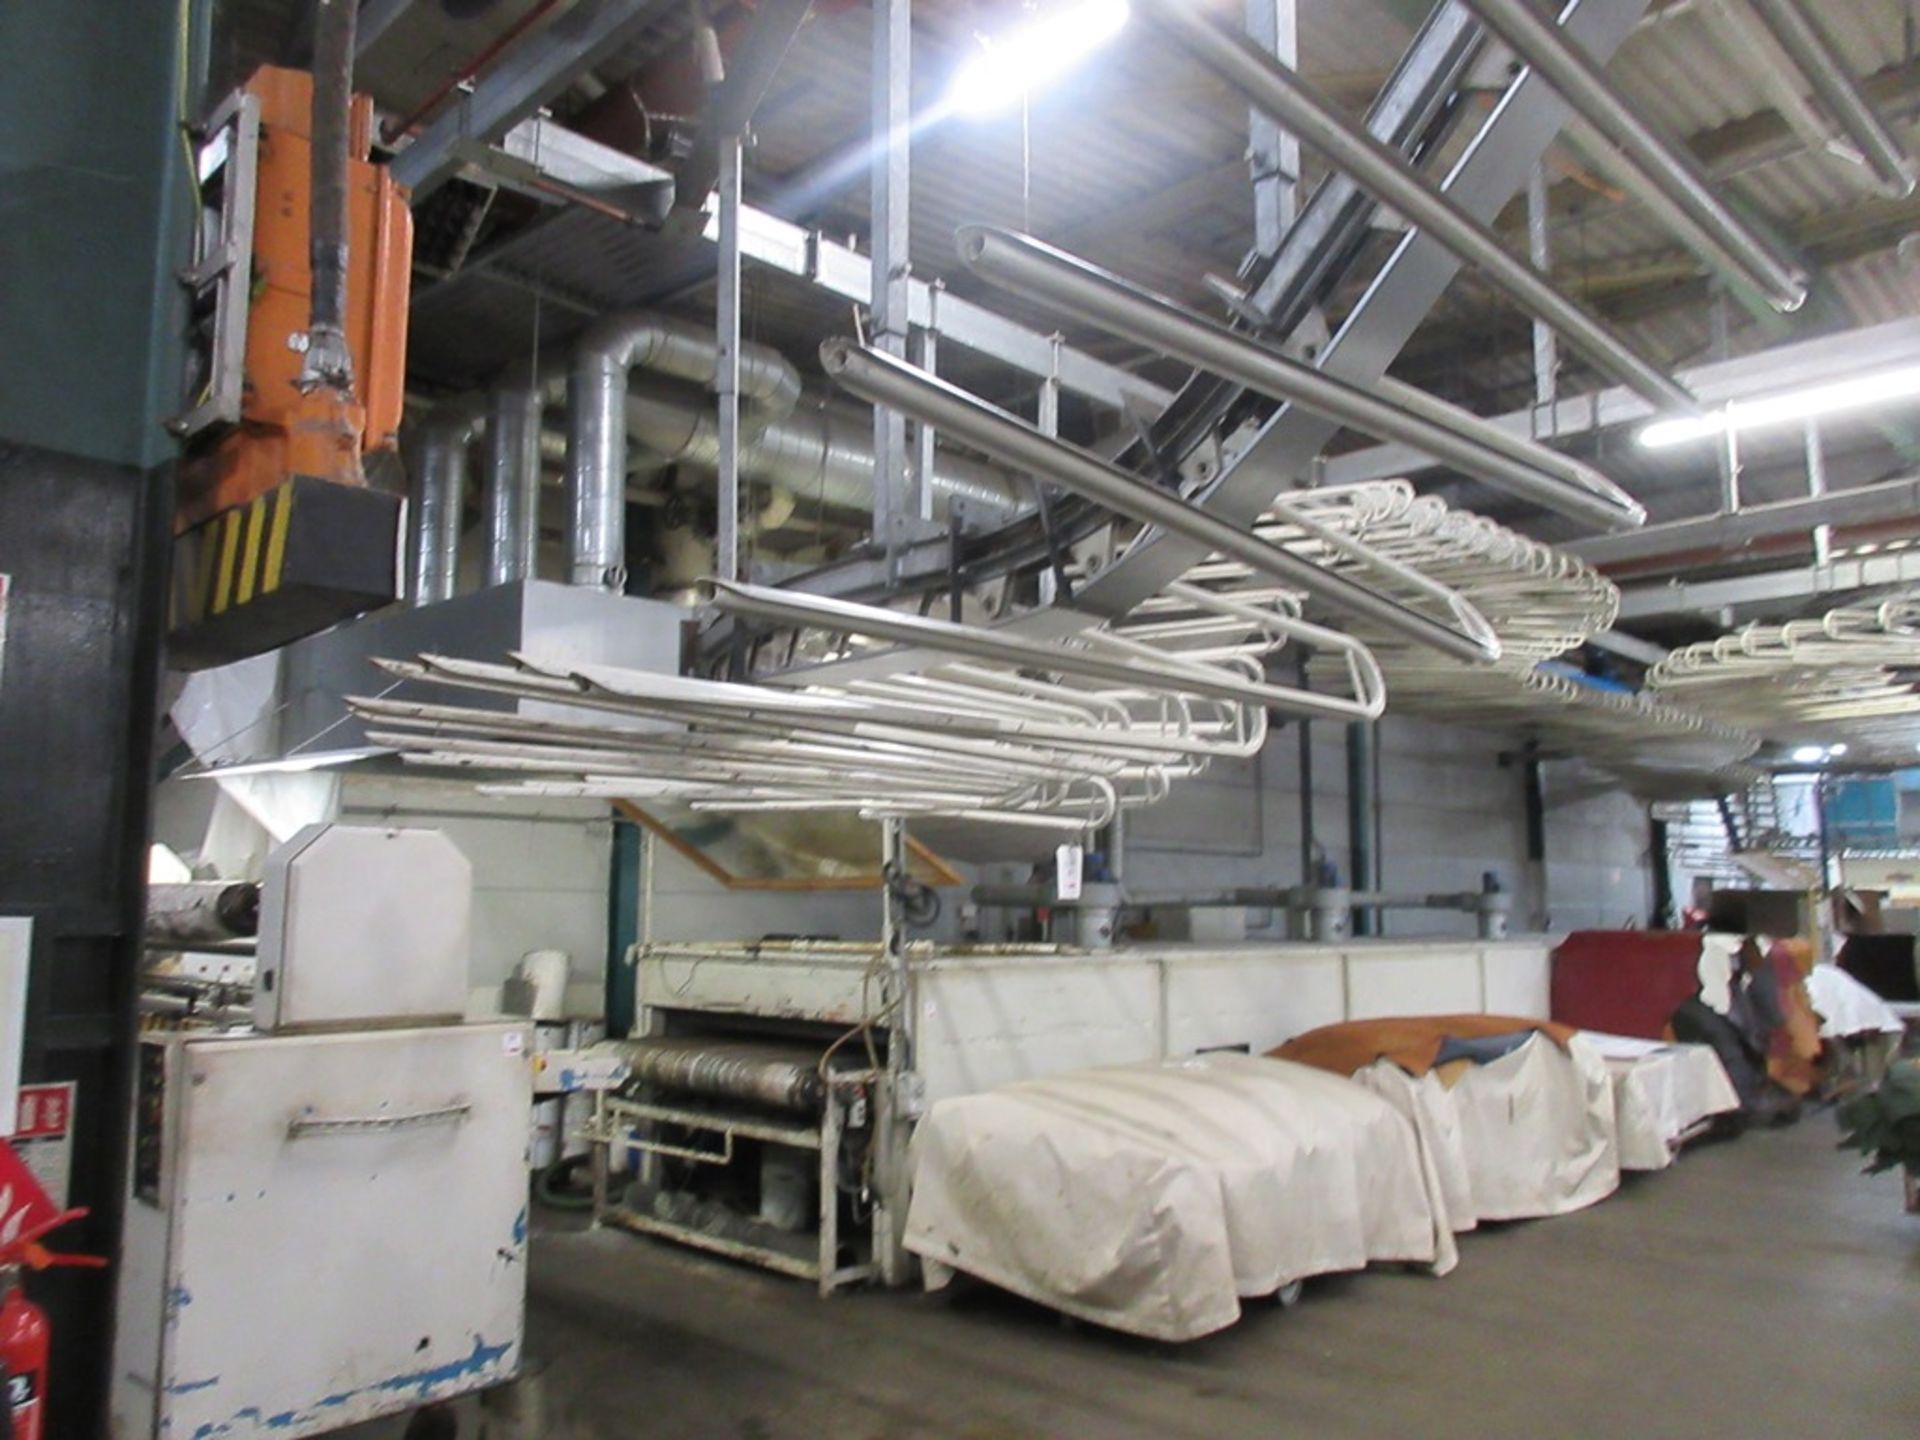 Motorised overhead drying conveyor, approx length circa 75m A work Method Statement and Risk